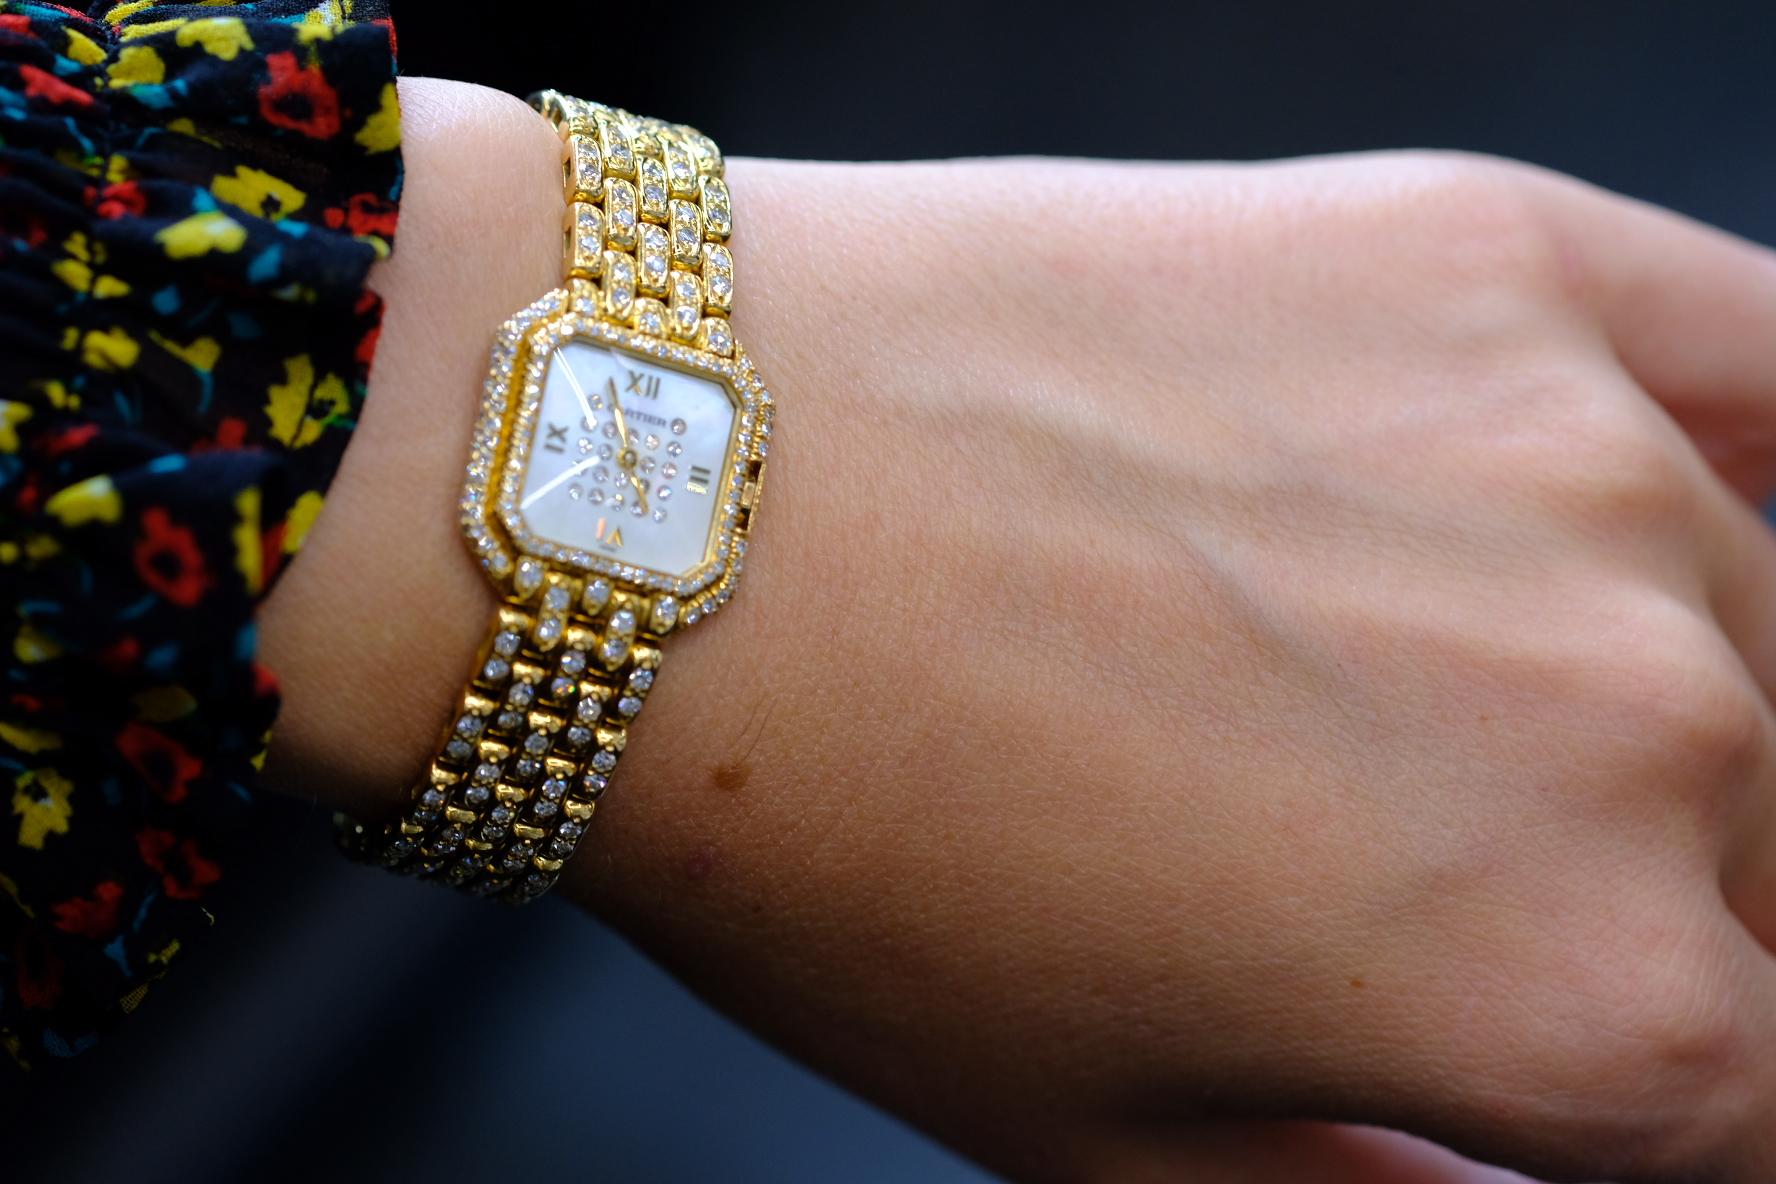 Cartier 18K Yellow Gold Diamond Panthere De Cartier Wrist Watch In Excellent Condition For Sale In New York, NY